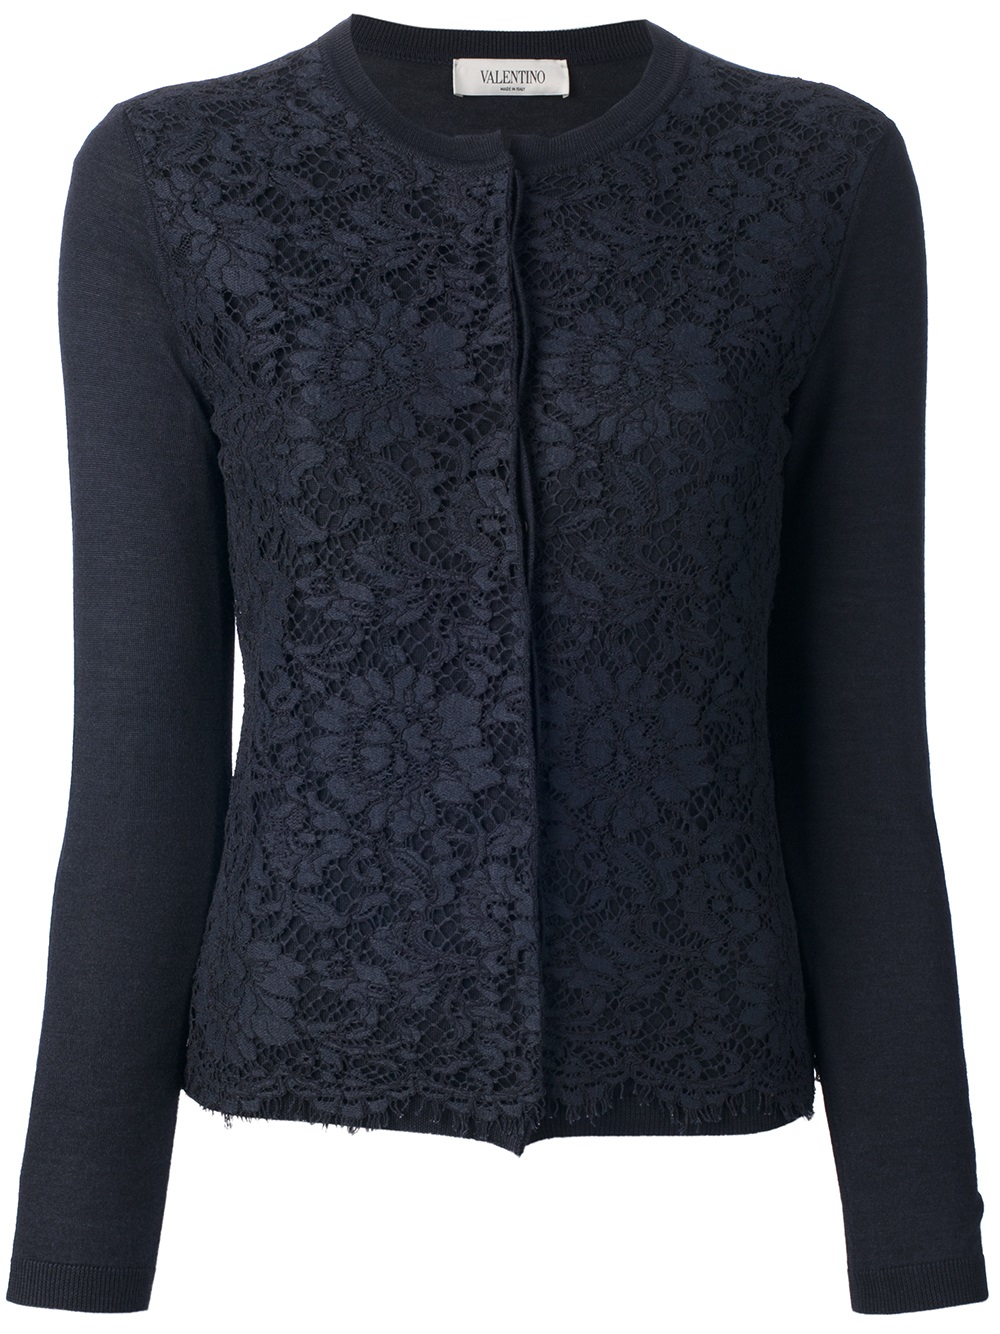 Valentino Lace Cardigan in Blue - Lyst